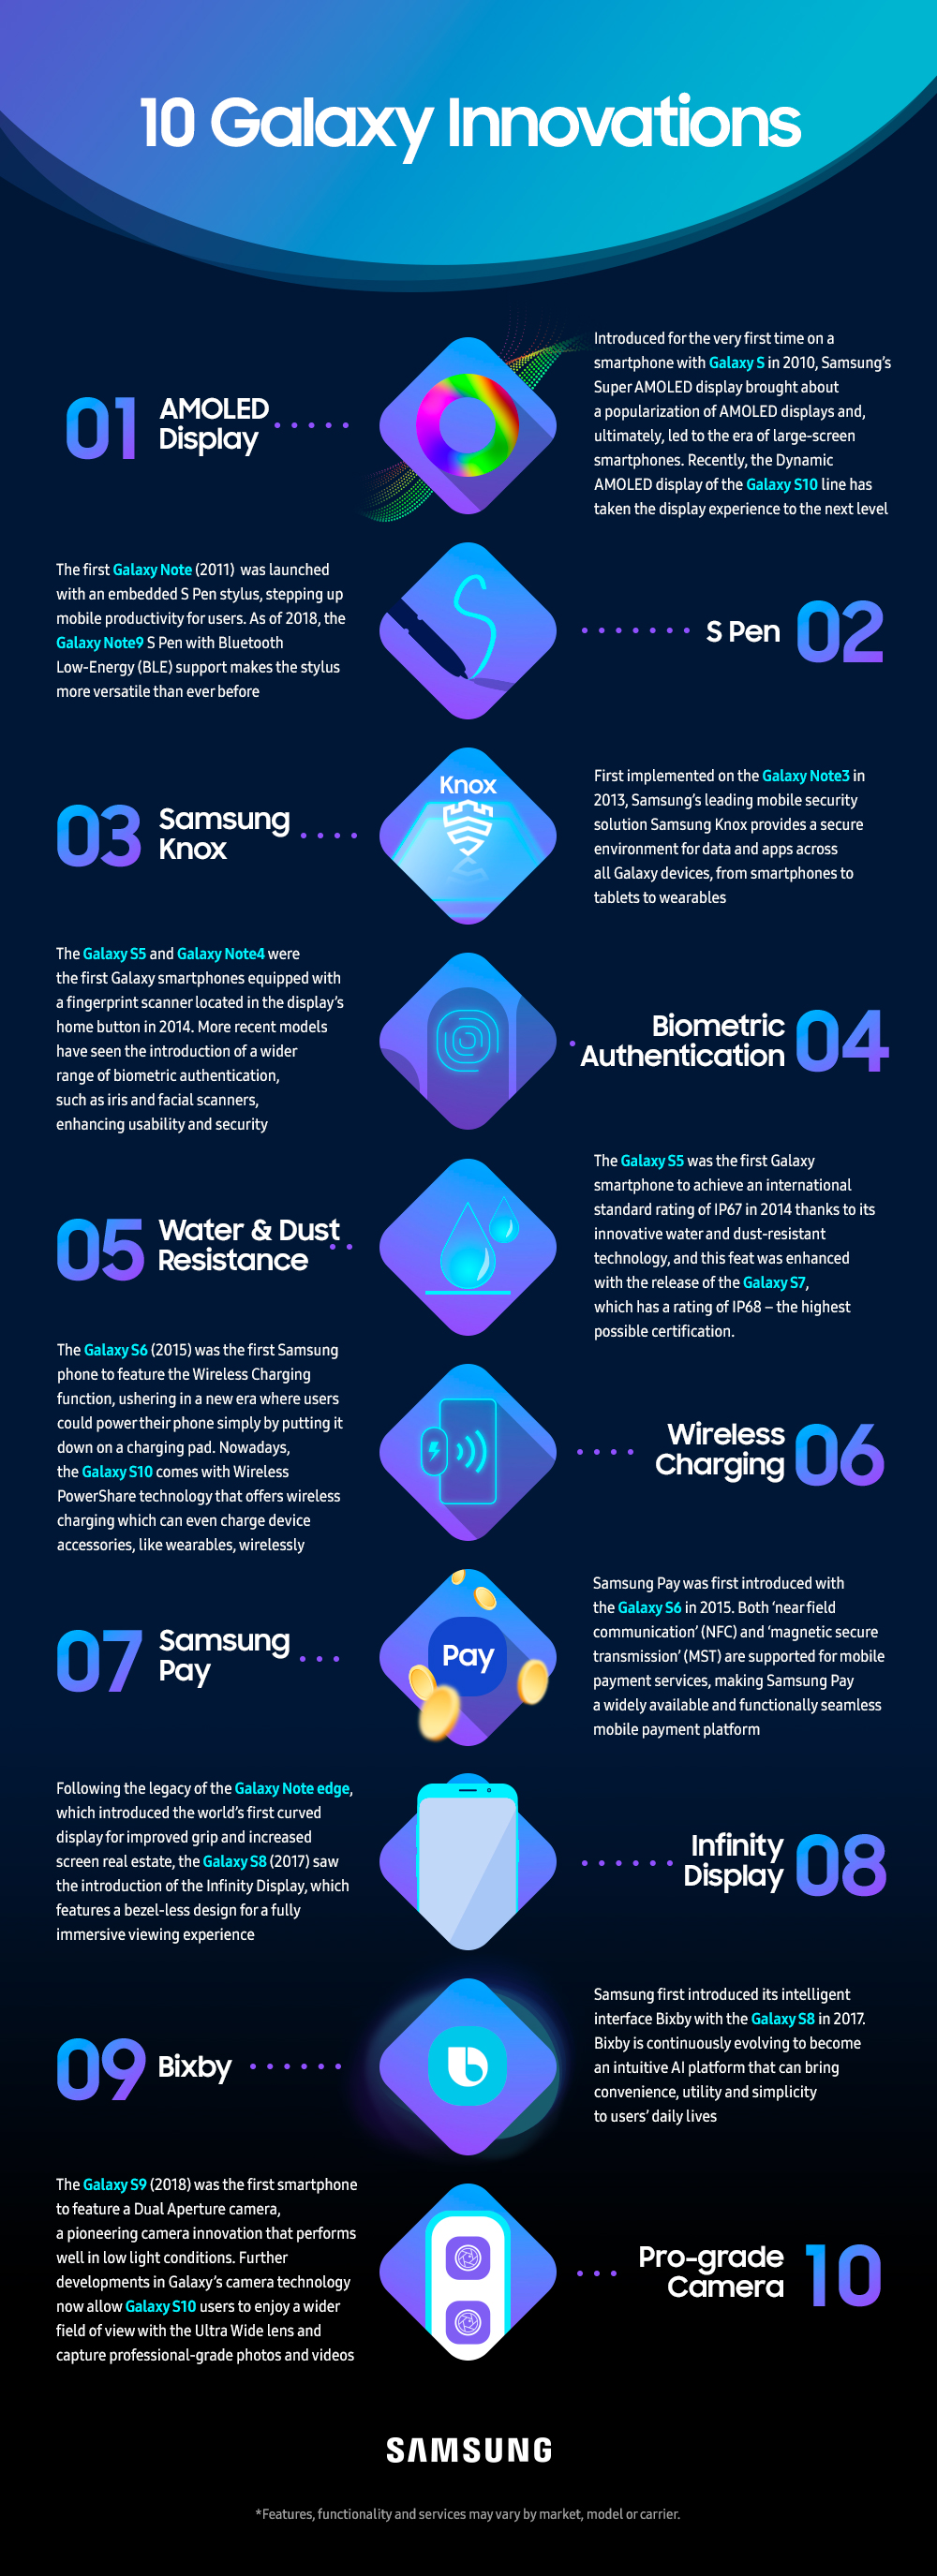 10-galaxy-innovations_Infographic-1